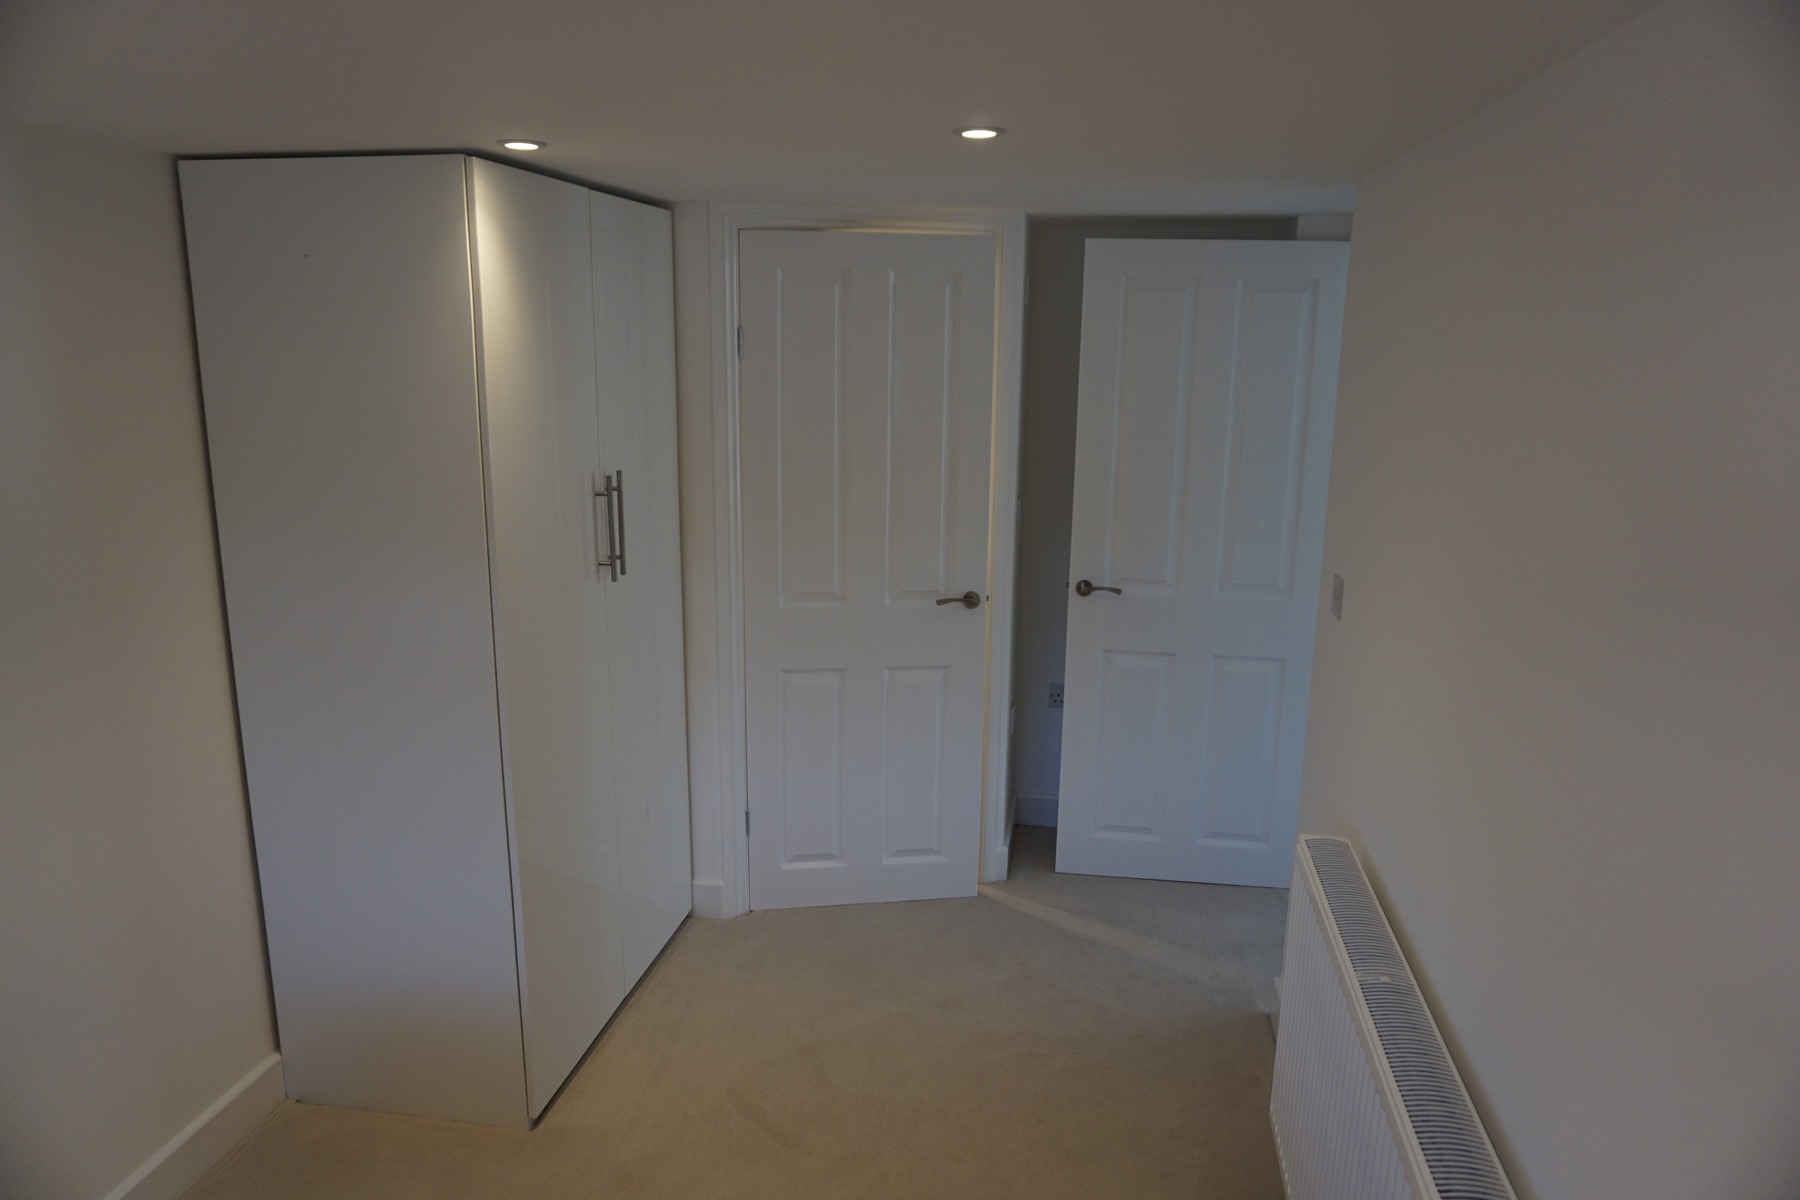 Garage conversion in Newport Pagnell with Cloakroom